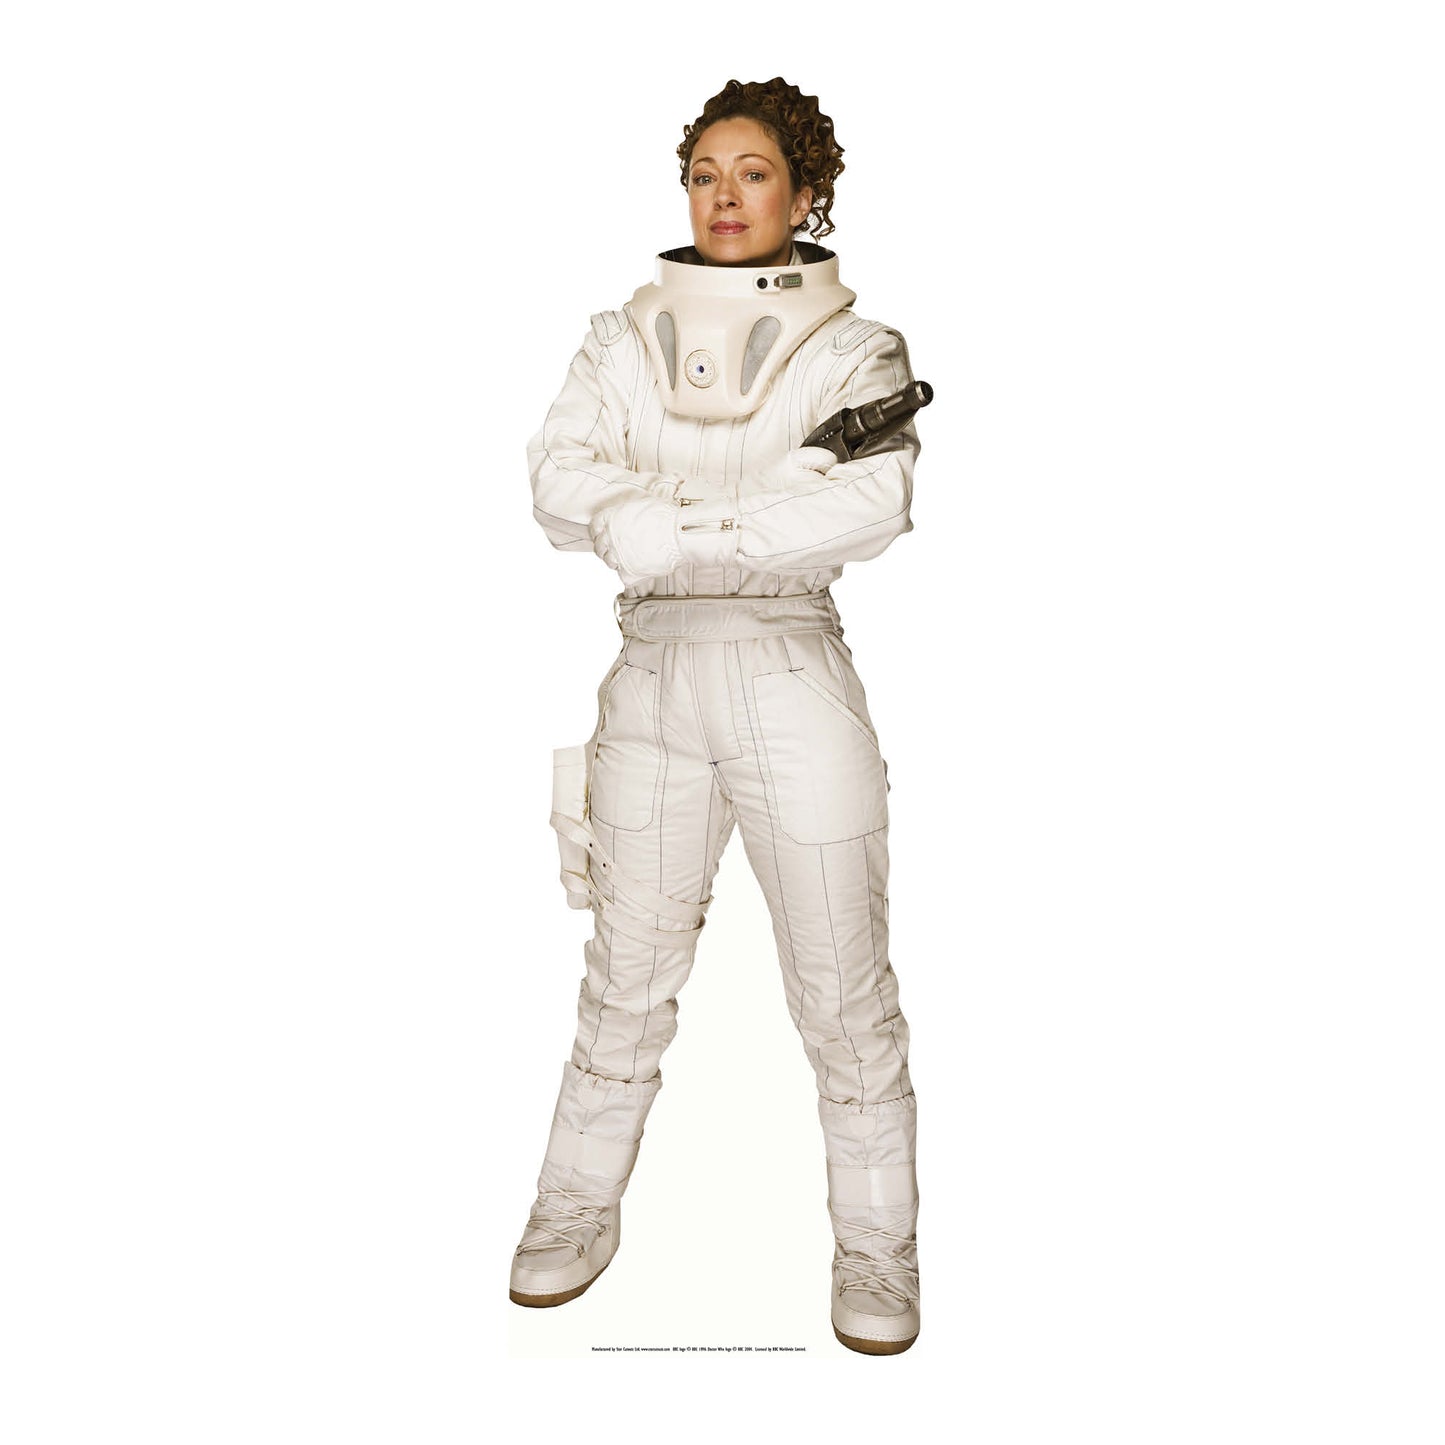 River Song Cardboard Cut Out Height 171cm - Star Cutouts